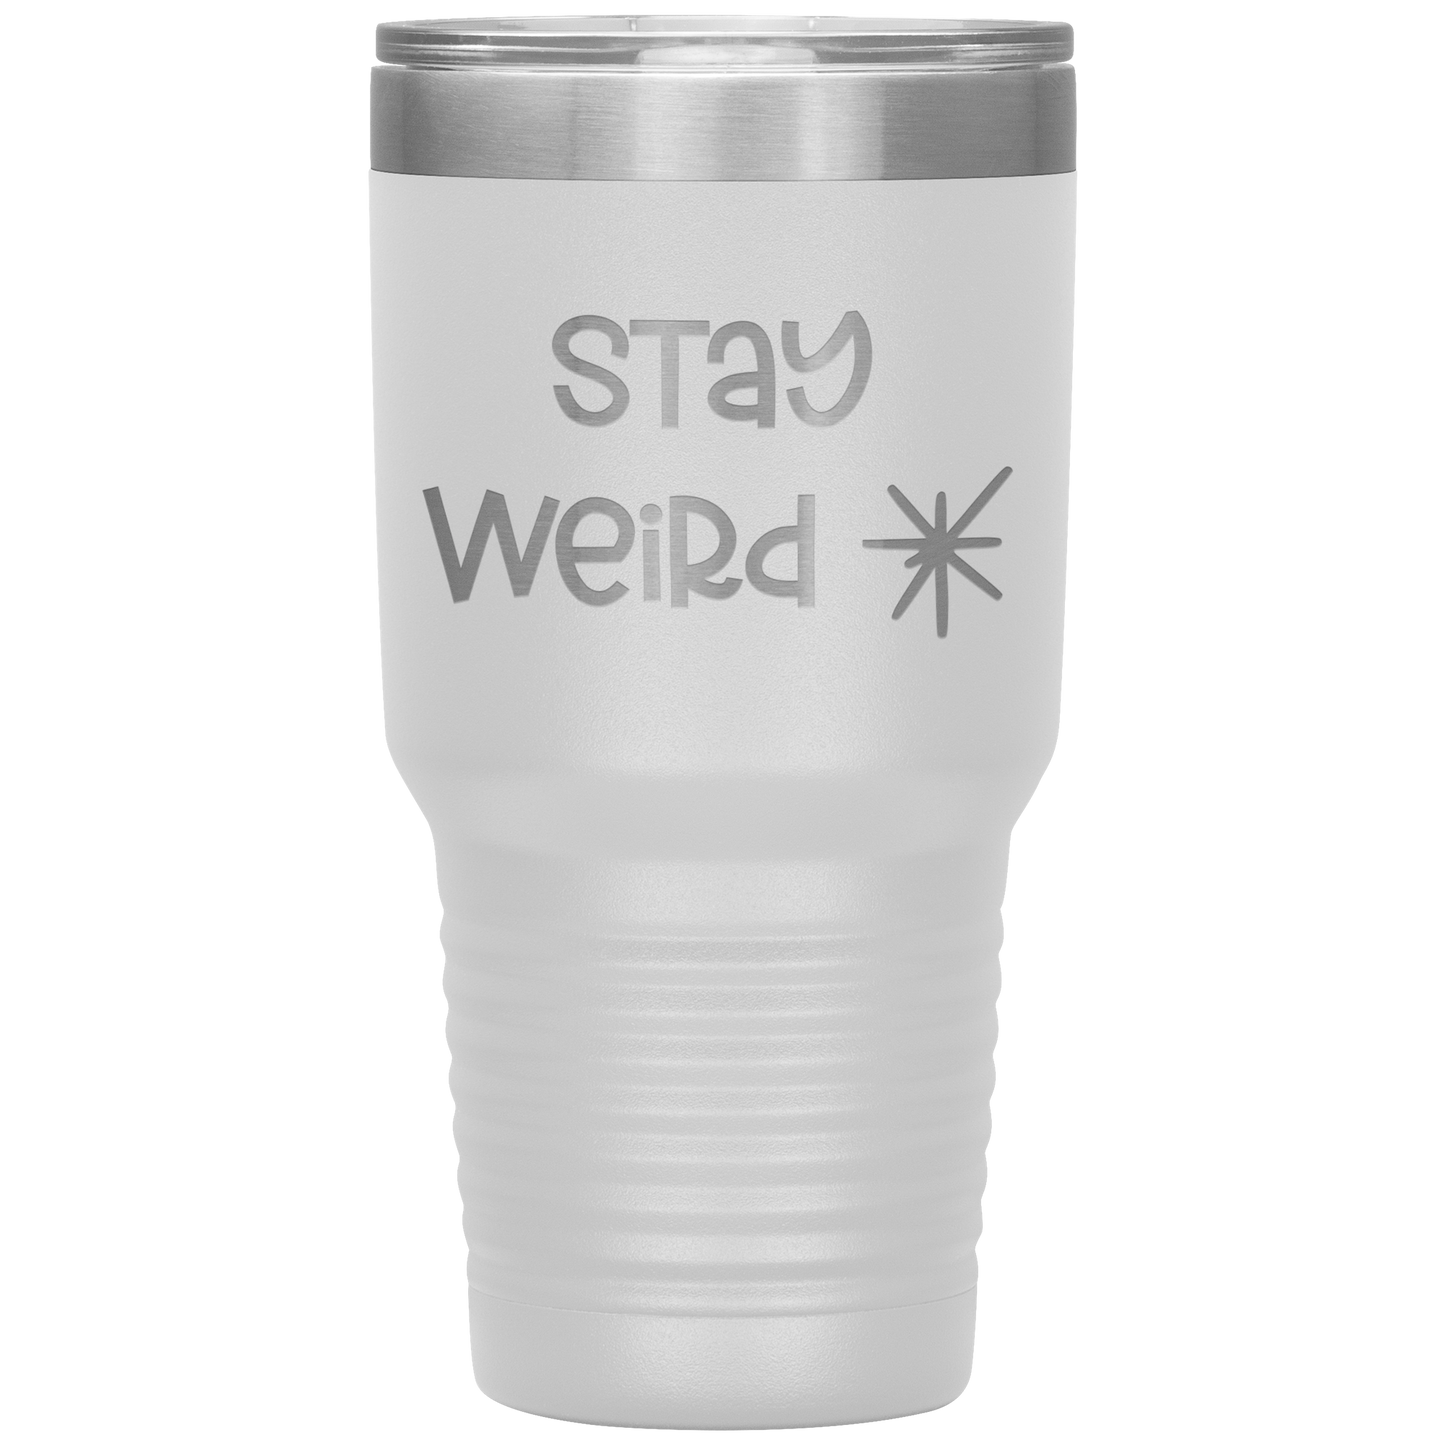 "Stay Weird" 30 oz. Insulated Stainless Steel Insulated Travel Coffee Cup with Lid